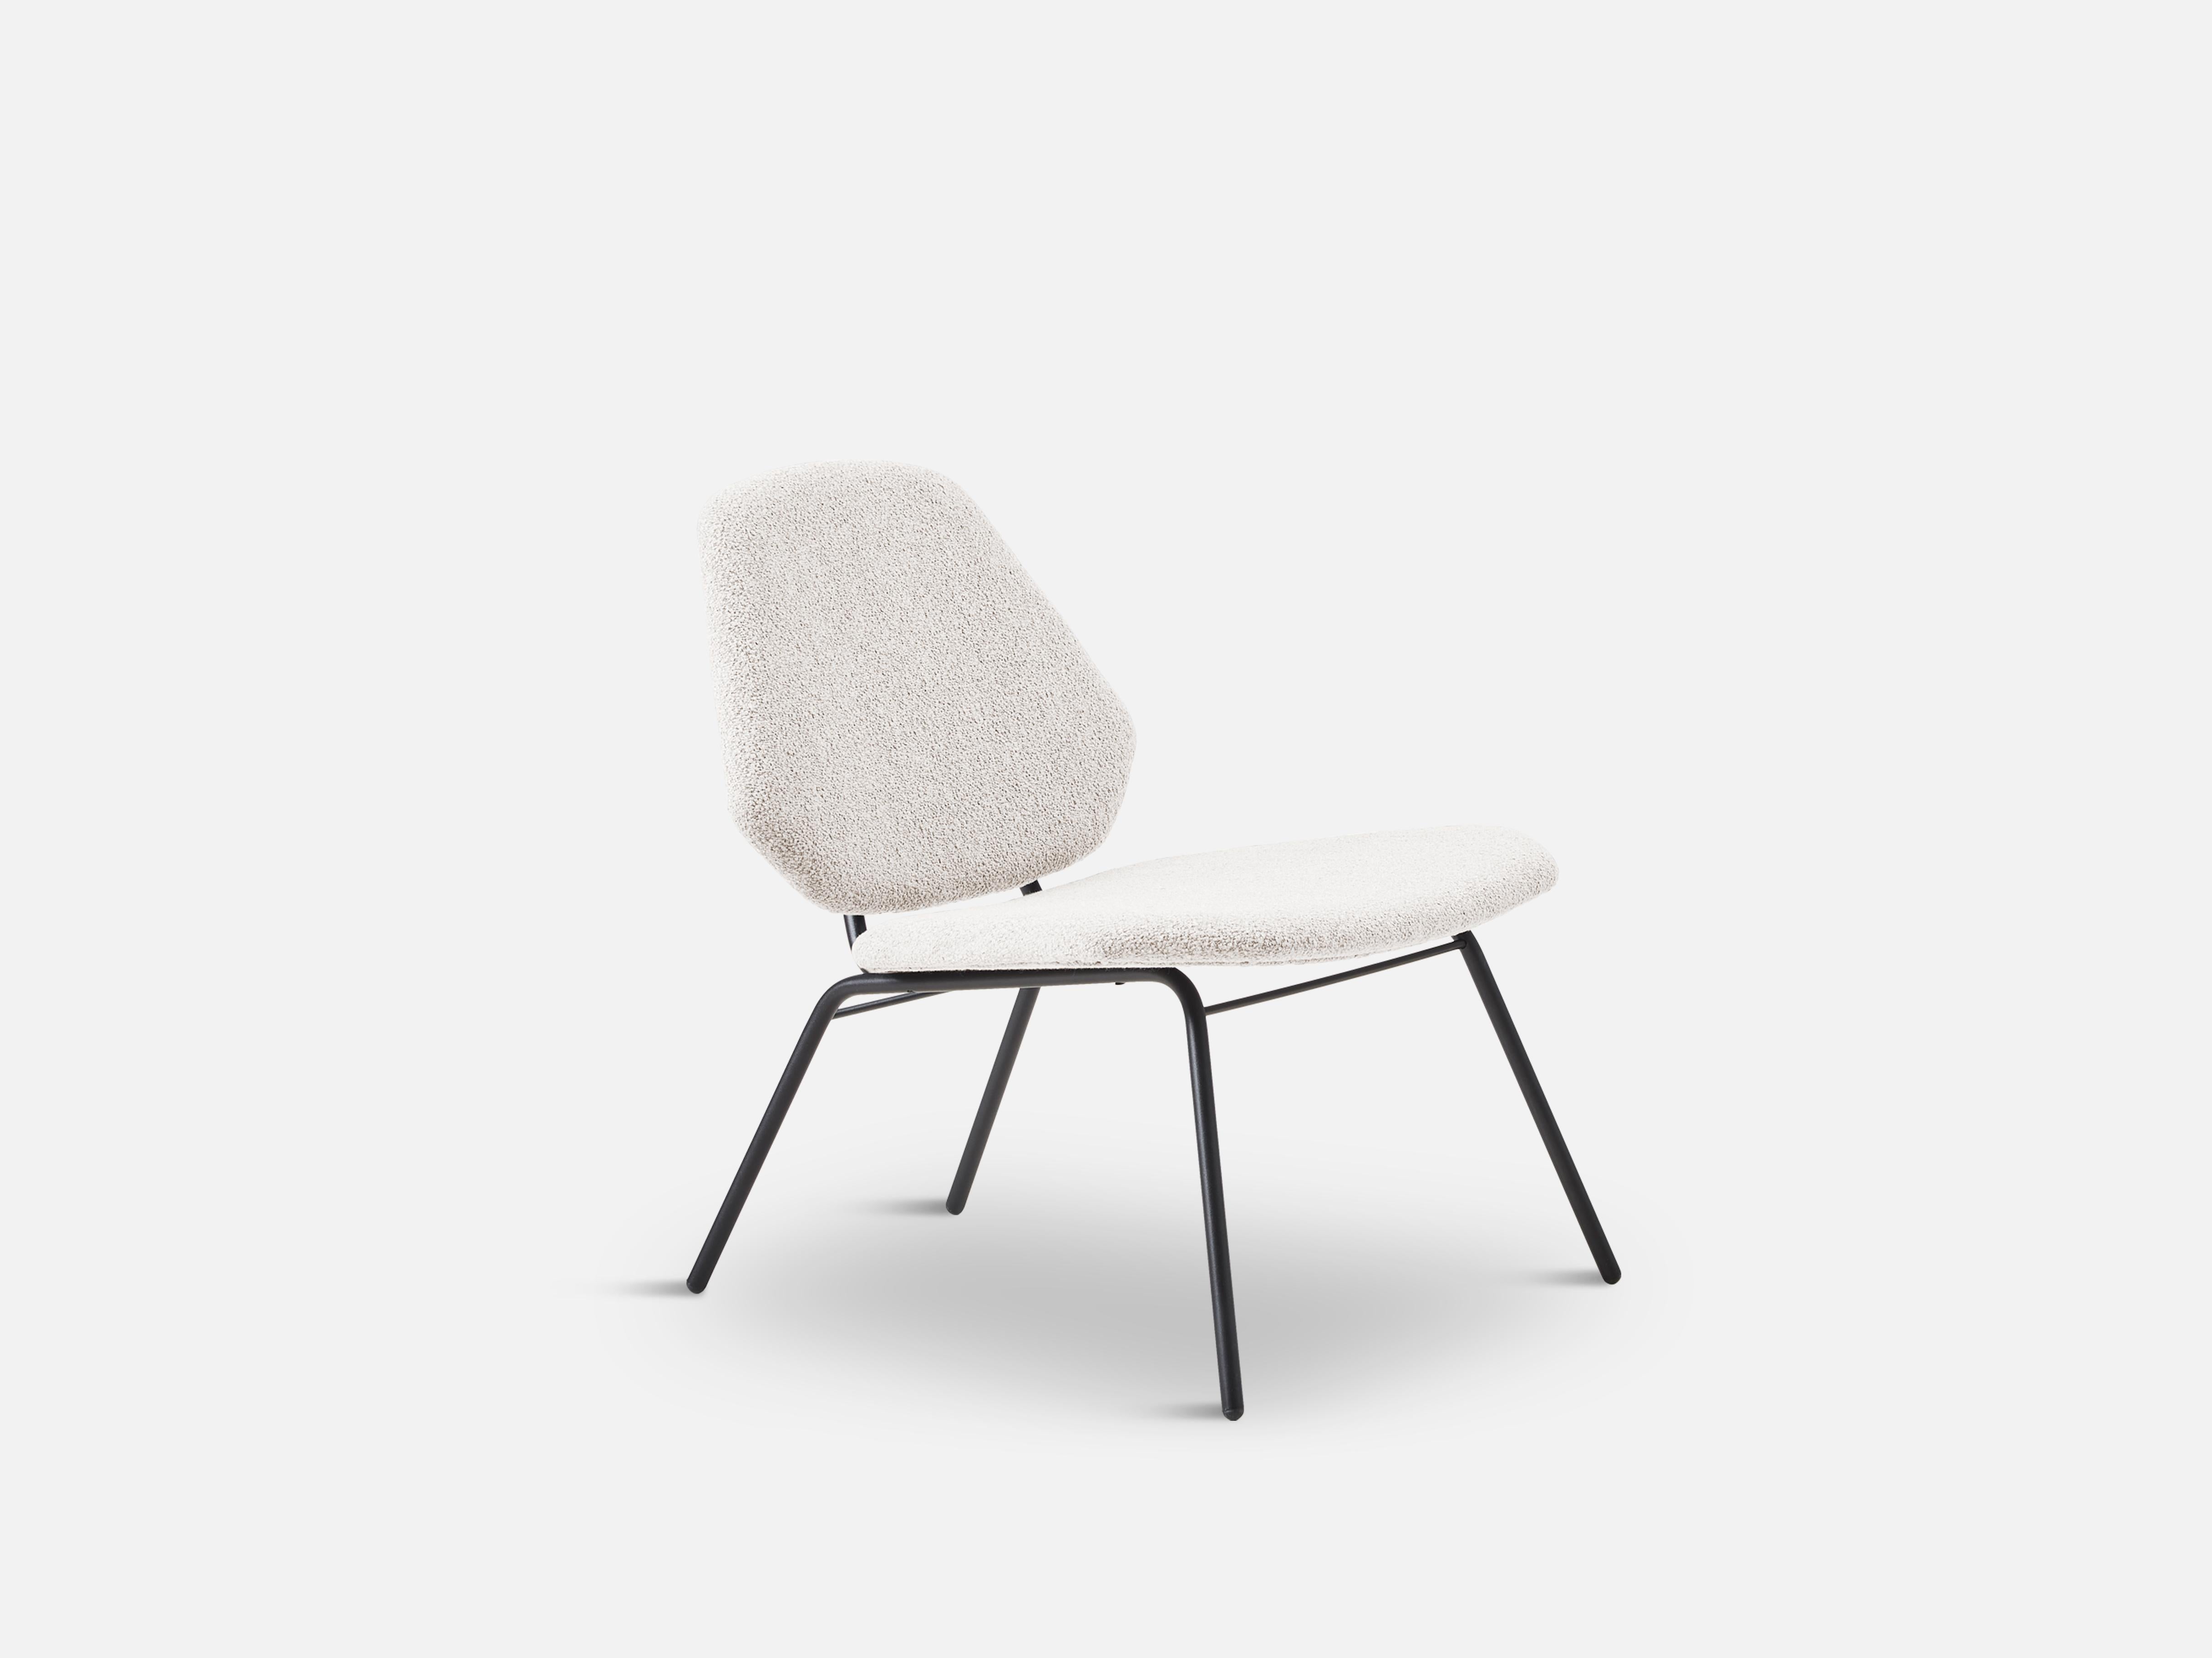 Lean ivory lounge chair by Nur Design
Materials: Plywood, fibre and foam.
Dimensions: D 66 x W 64 x H 72 cm
Also available in different colors.

The founders, Mia and Torben Koed, decided to put their 30 years of experience into a new project.